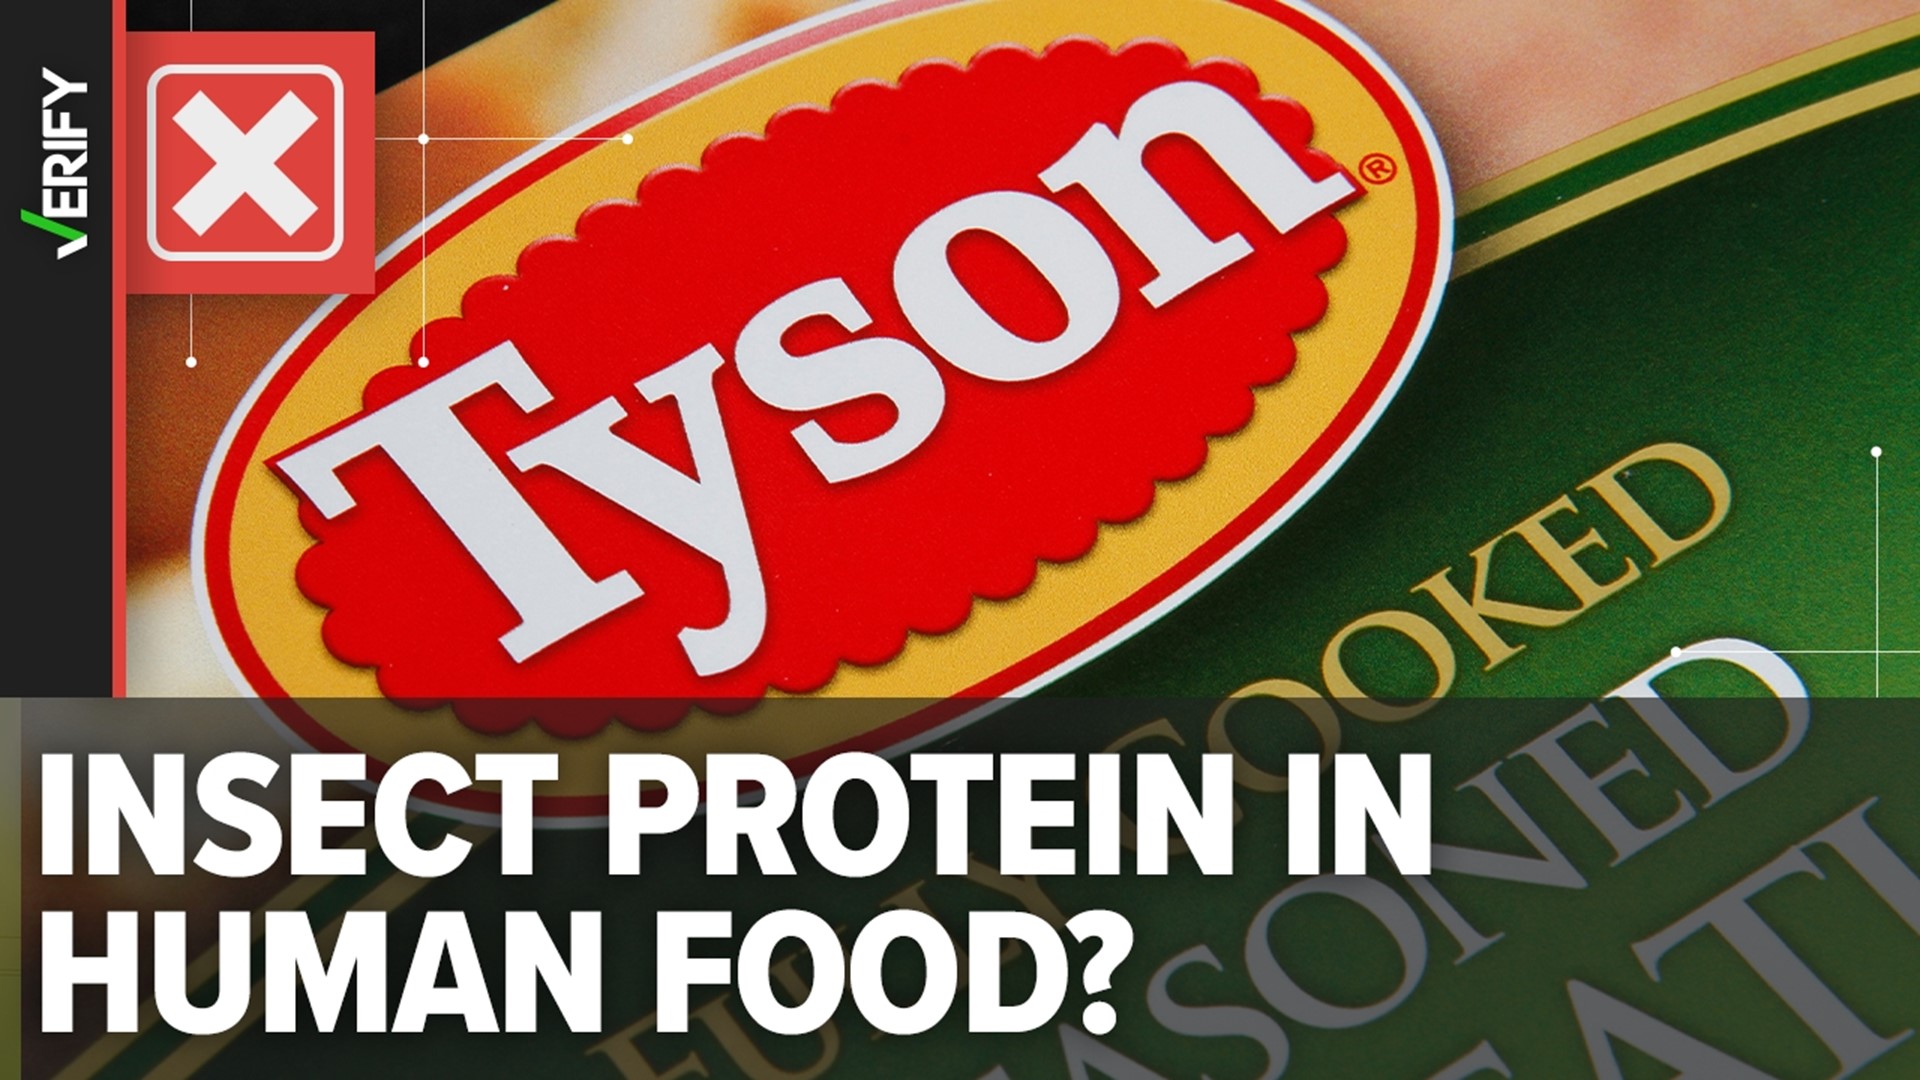 No, Tyson Foods did not announce a plan to add insects to food for ...